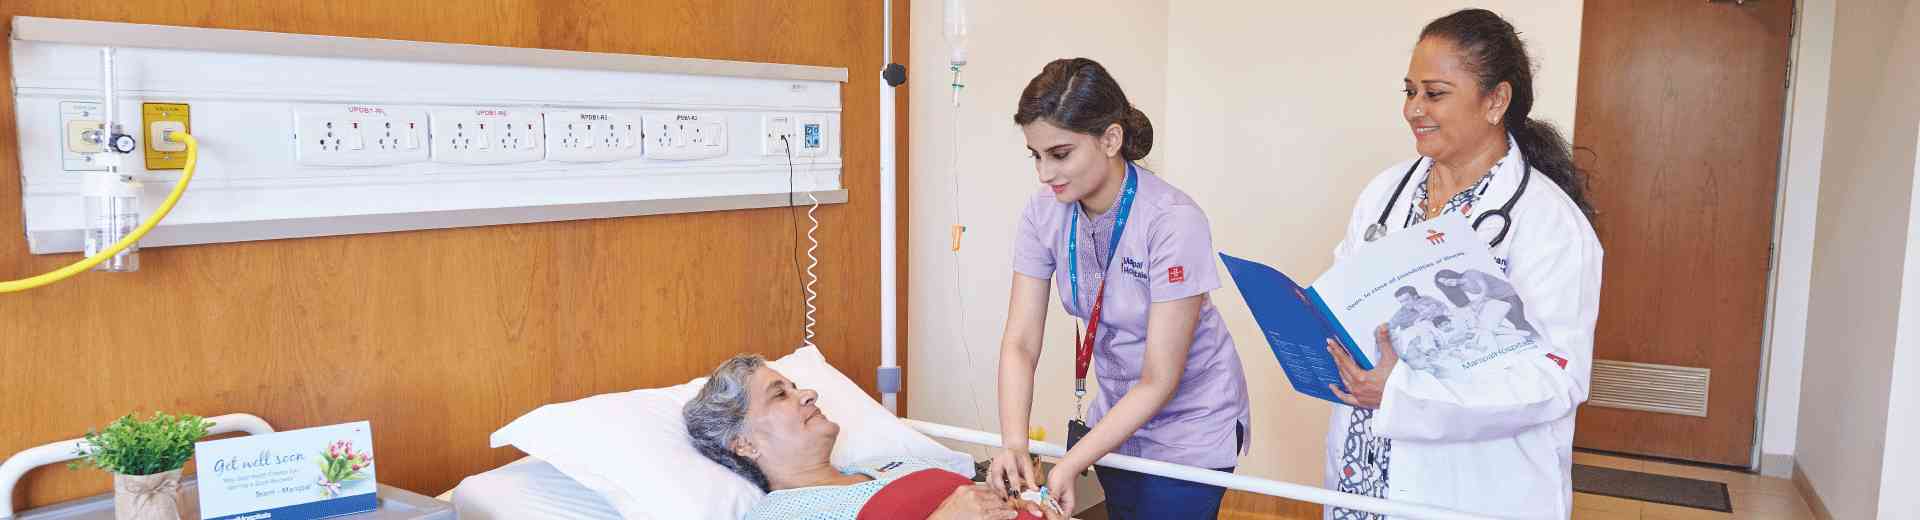 Outpatient Inpatient and Emergency services in Gurgaon